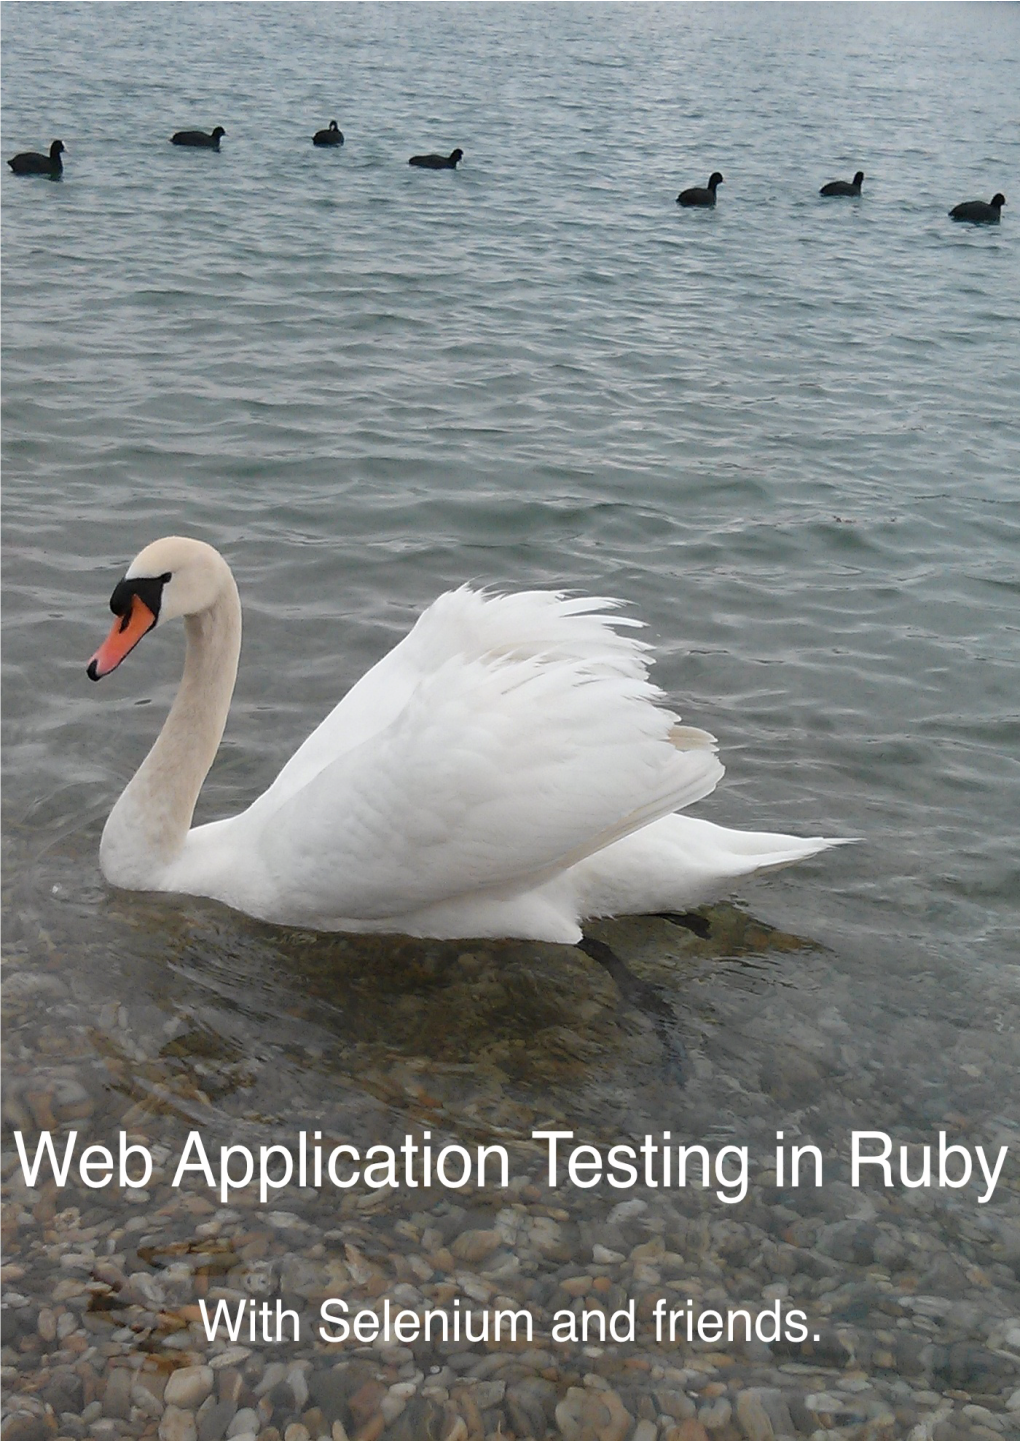 Web Application Testing in Ruby with Selenium and Friends